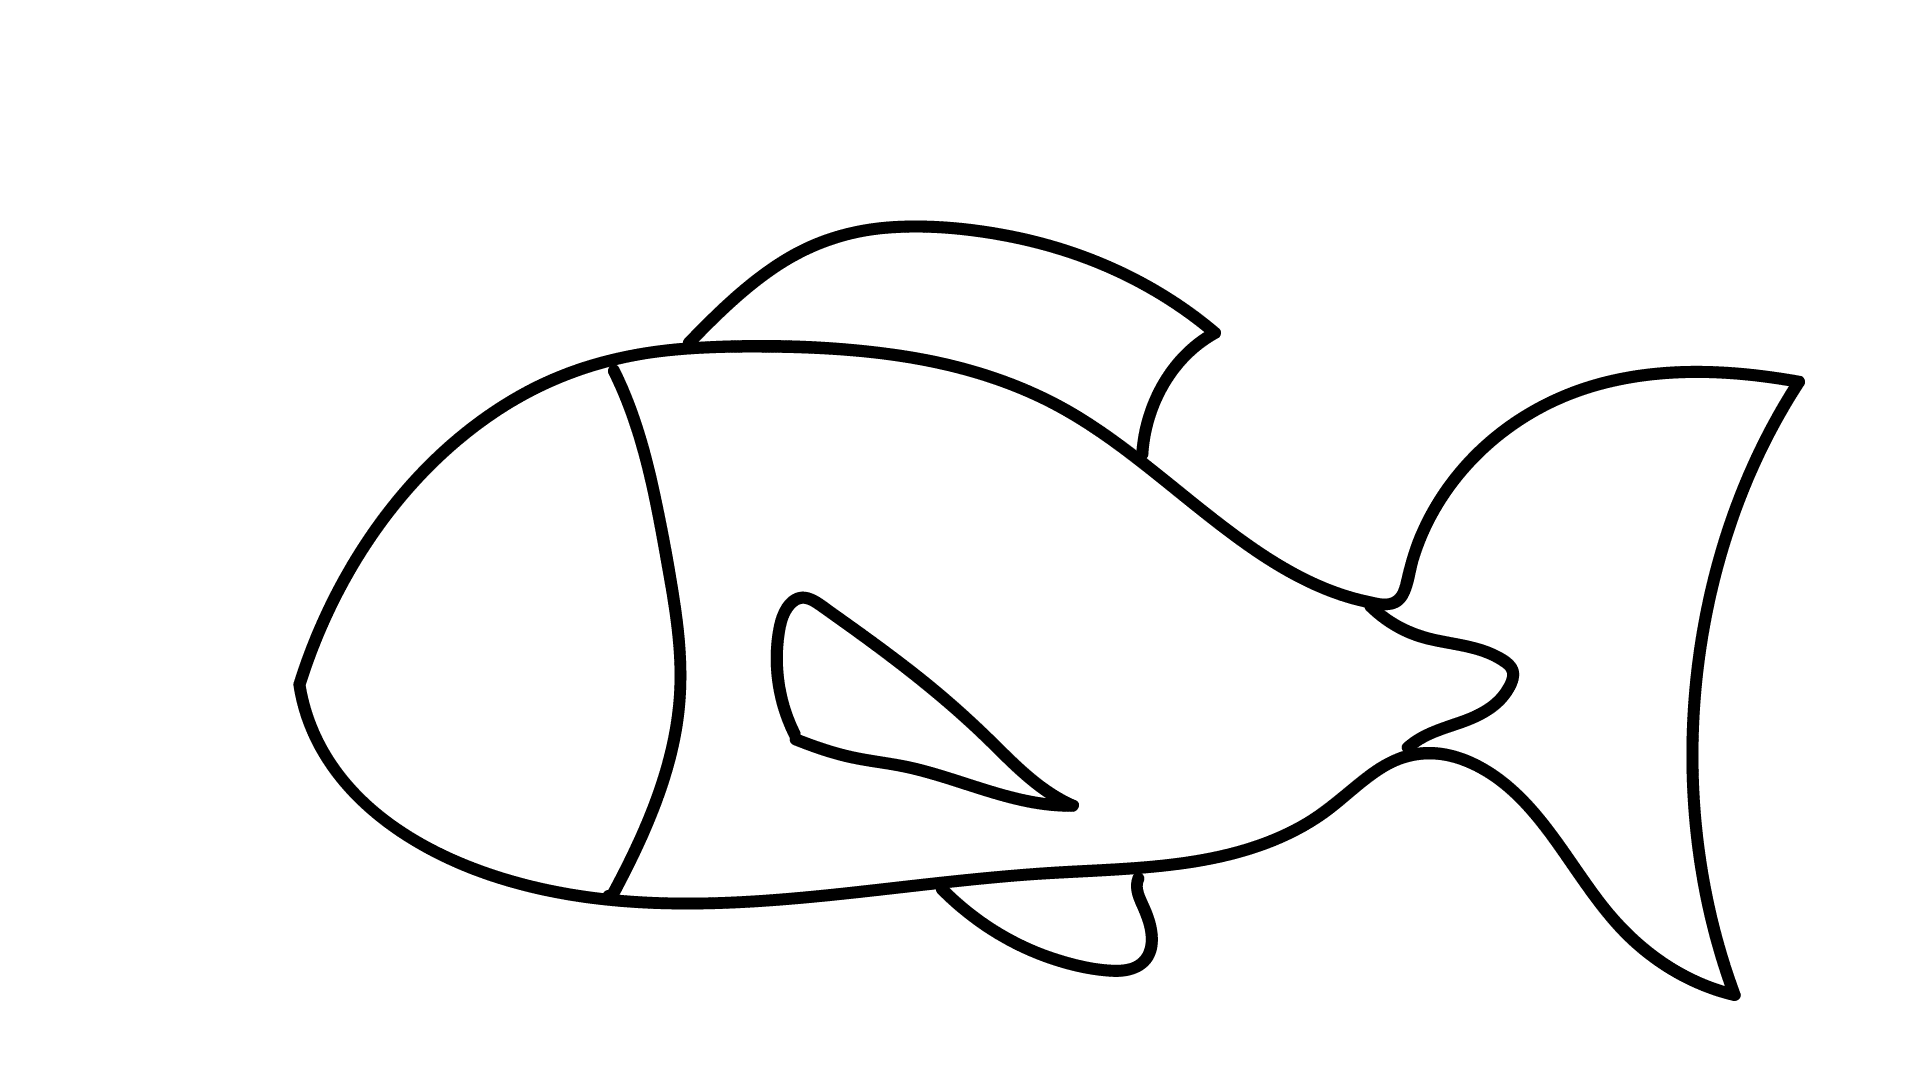 How to draw a fish - Step 3